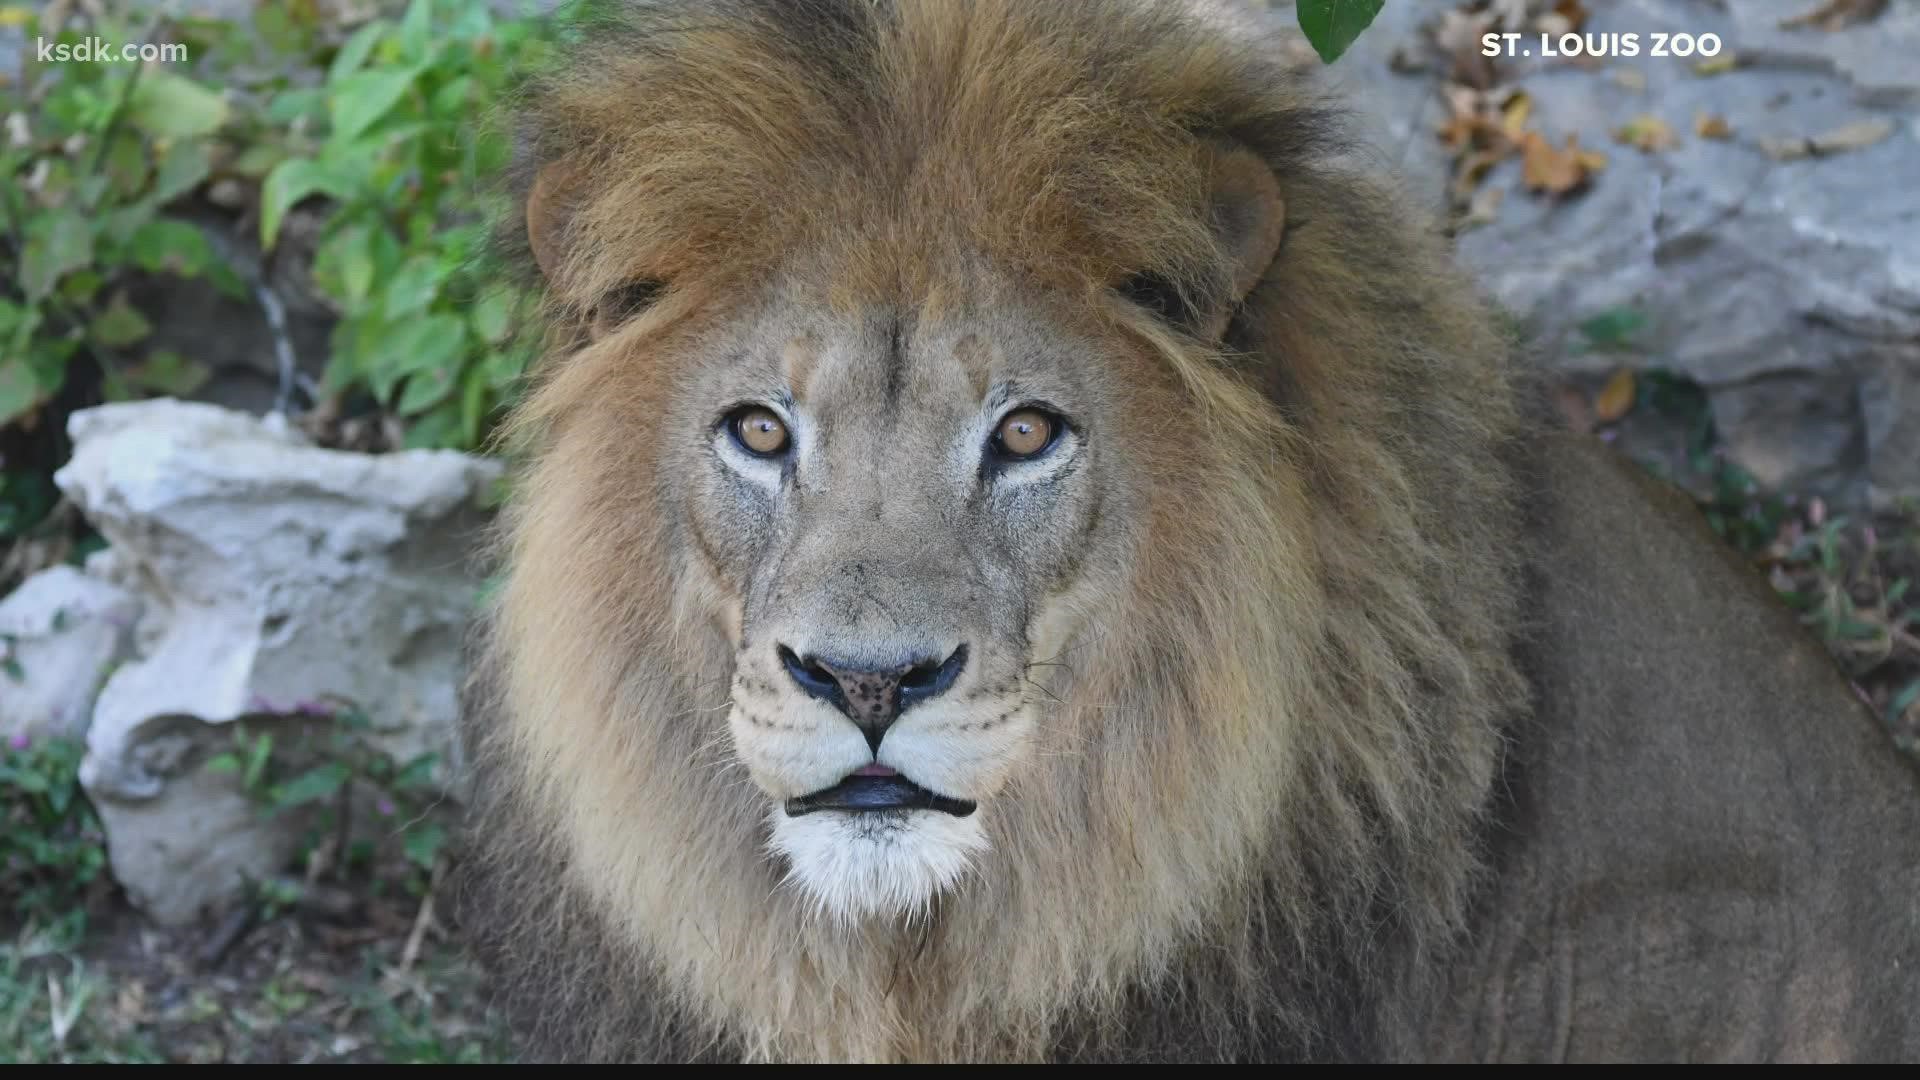 Several big cats at the Saint Louis Zoo have recently tested positive for SARS-CoV-2, the virus that causes COVID-19. The zoo expects them to make a full recovery.